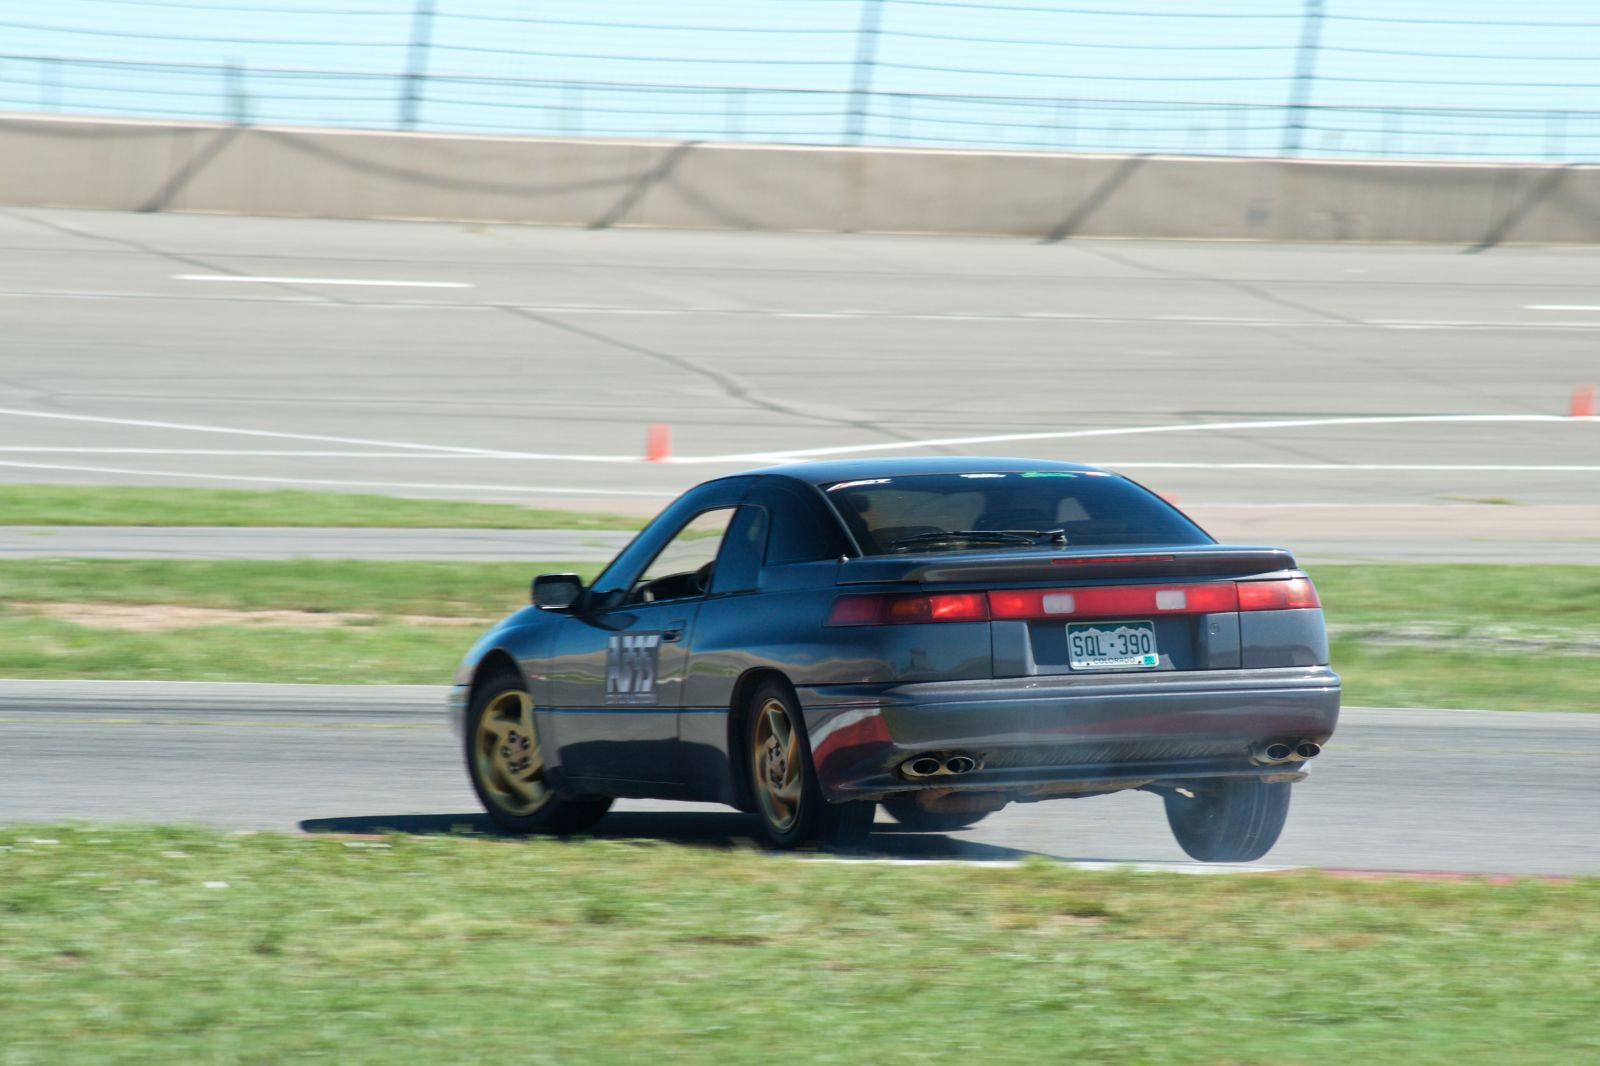 and it’s a spin for the SVX